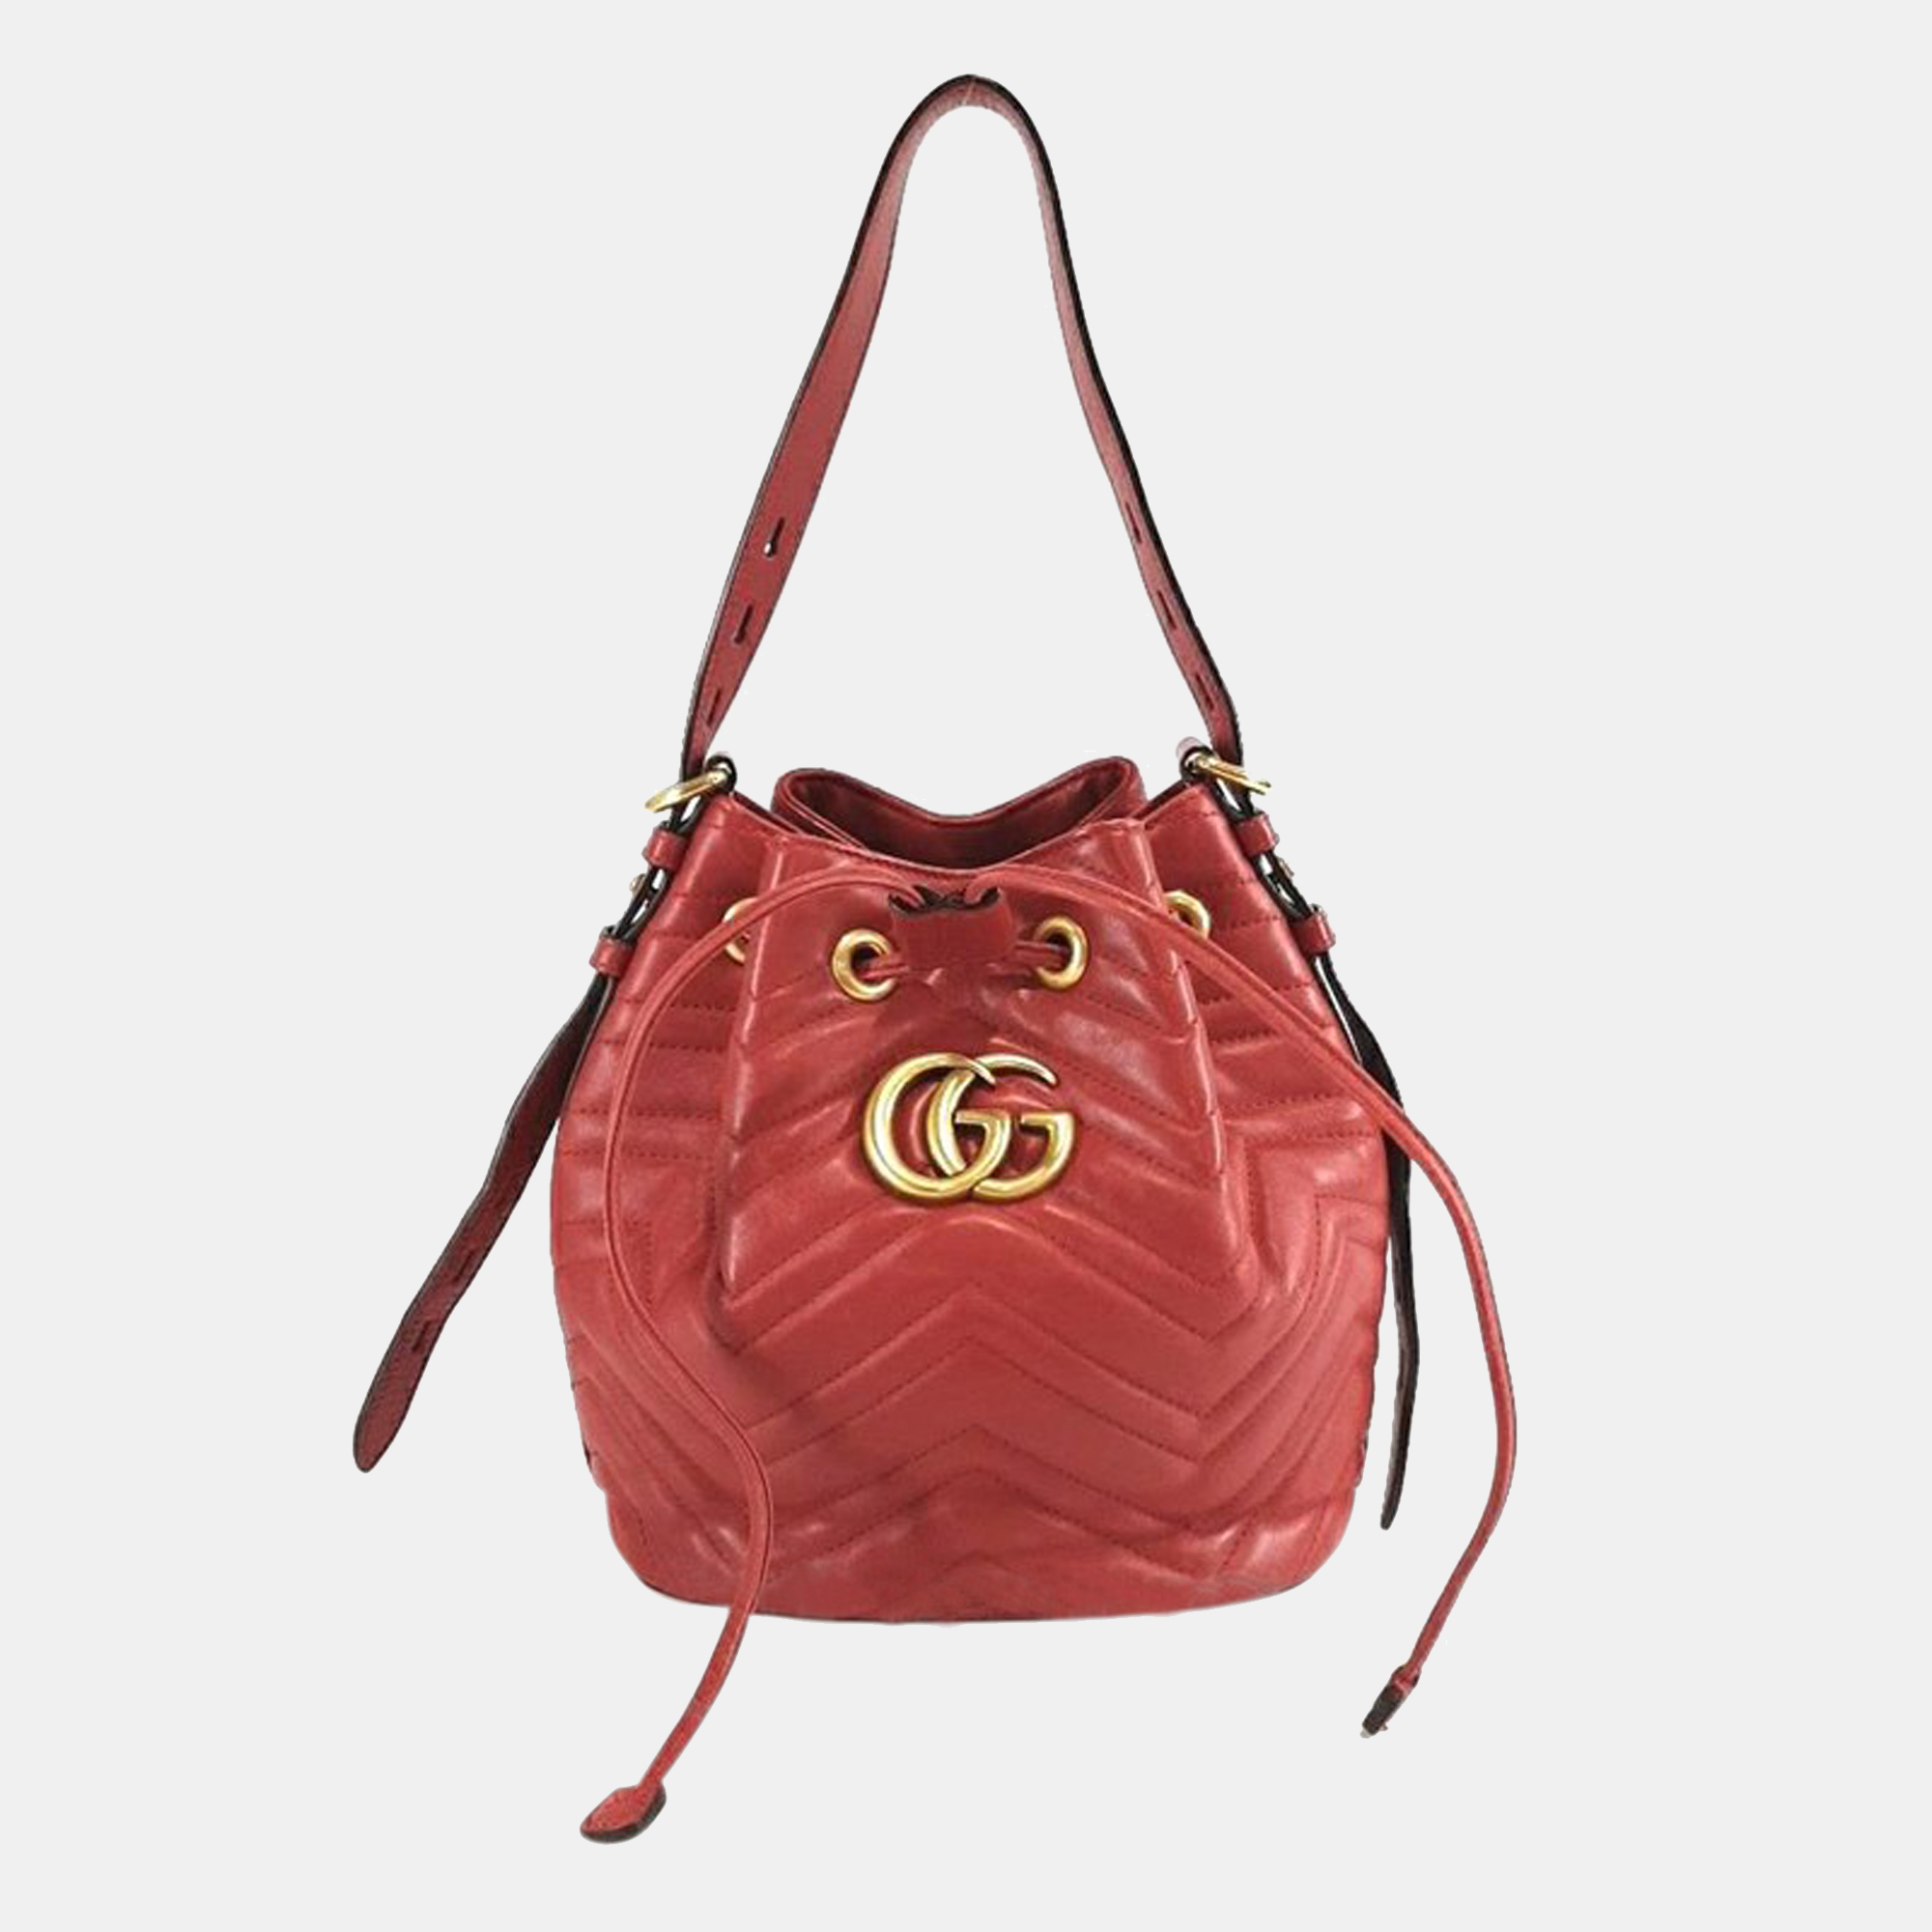 Gucci red marmont bucket bag